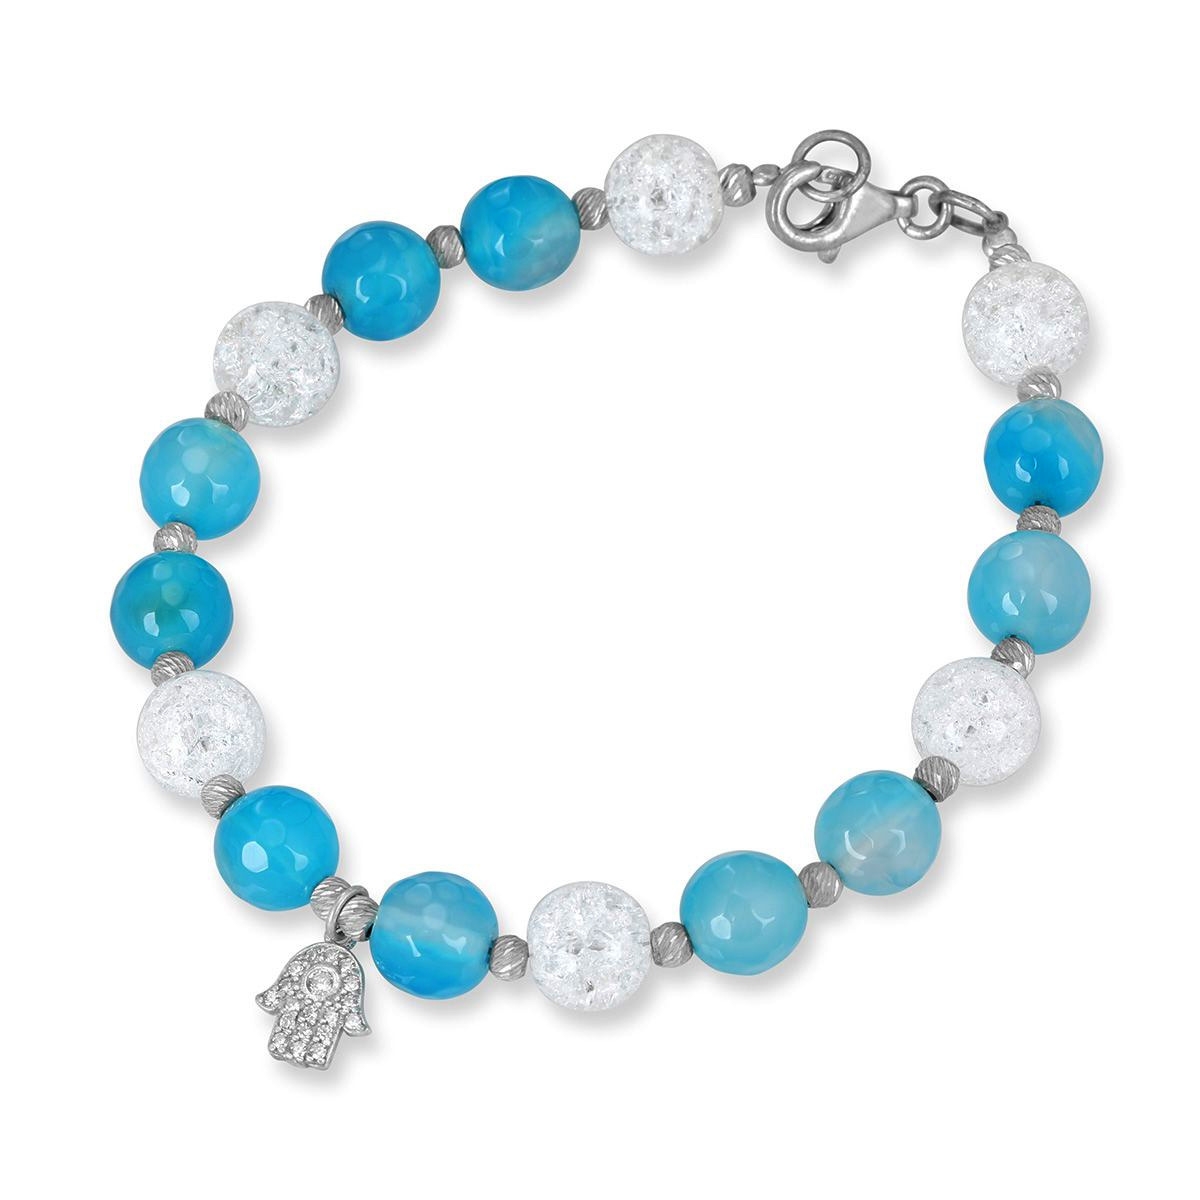 Rafael Jewelry Handcrafted Sterling Silver  Hamsa Bracelet With Crystal and Blue Agate Stones - 1